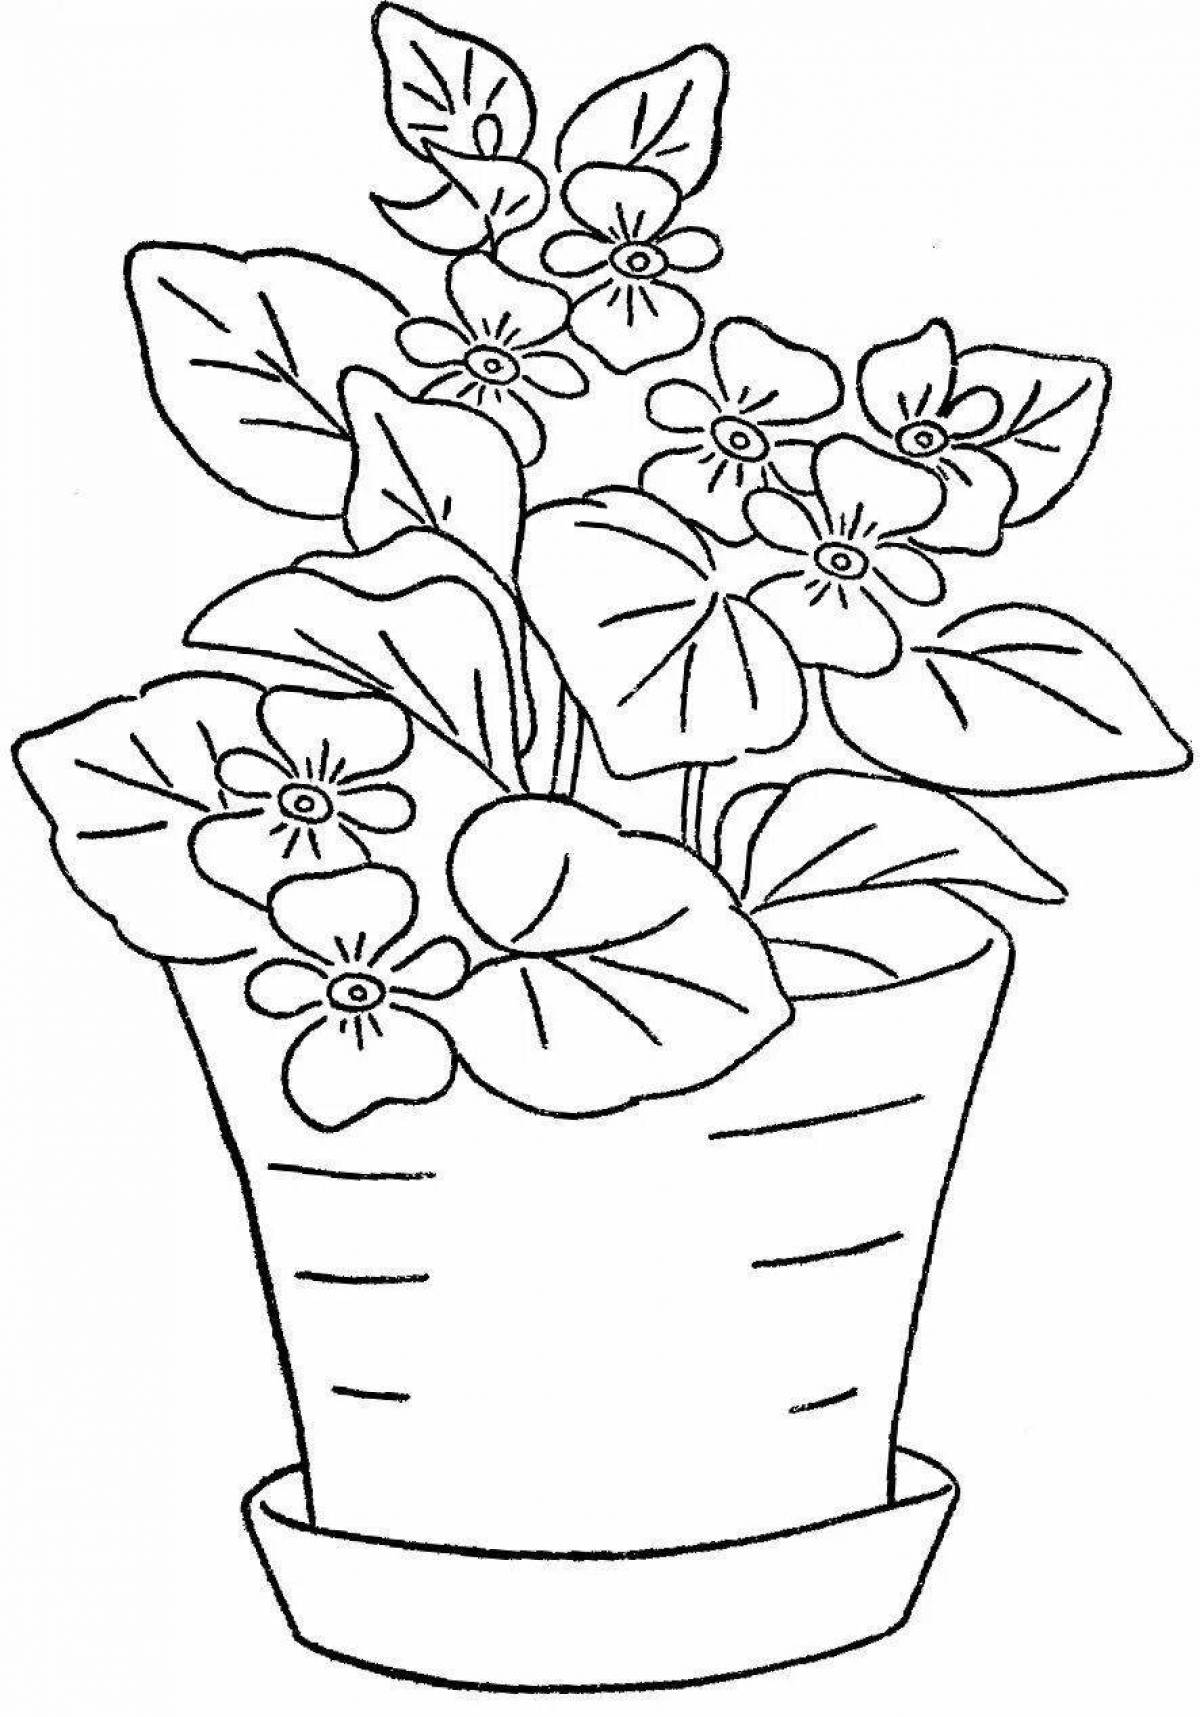 A fun indoor plant coloring book for 3-4 year olds